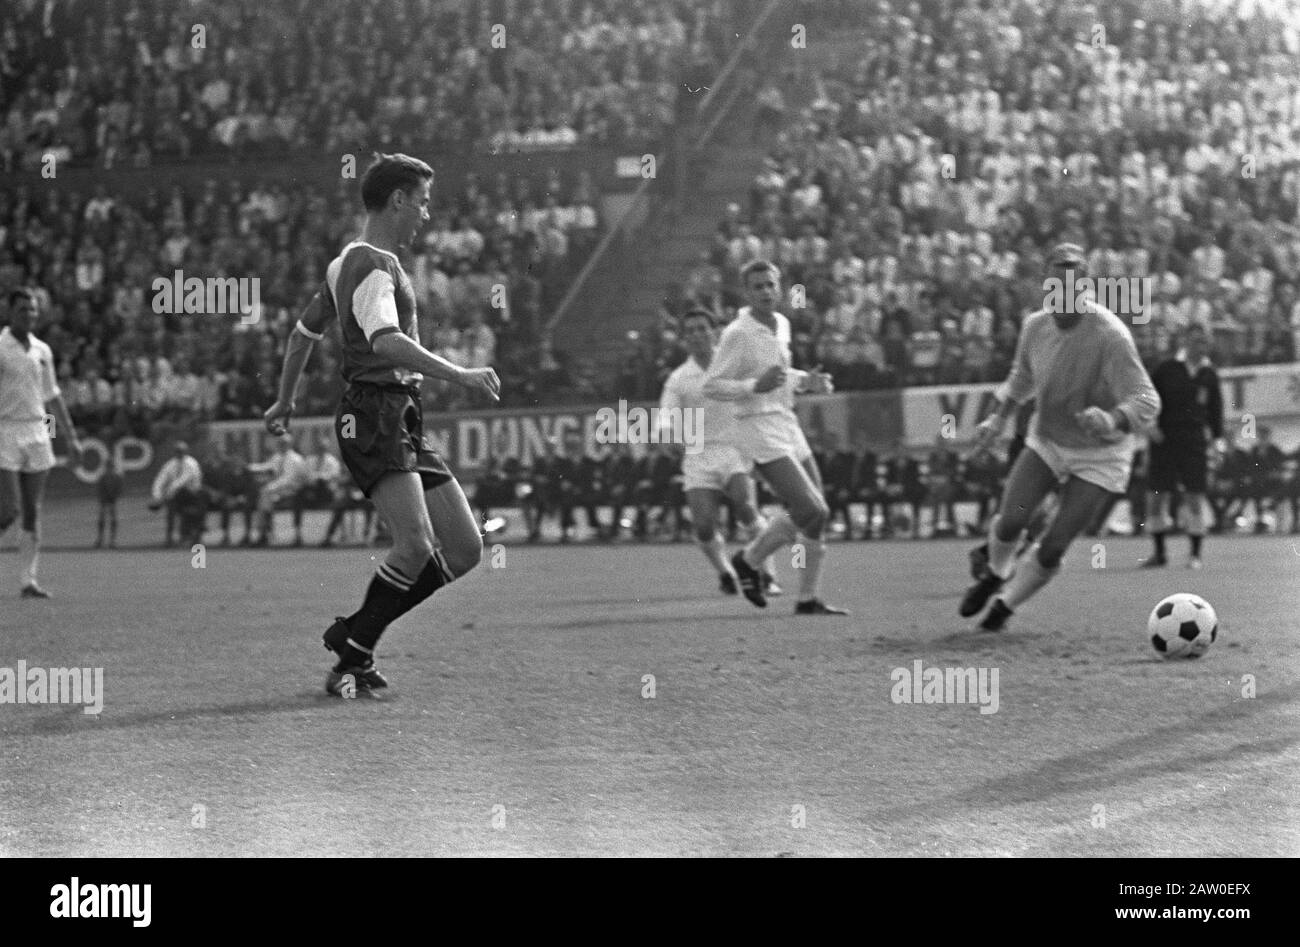 NEC v Feyenoord 0-5. Kindvall scored 2-0 (right) The keeper Bree reviewing Date: August 27, 1967 Keywords: goalies, sports, football Person Name: Kindvall, Ove Institution Name: Feyenoord Stock Photo